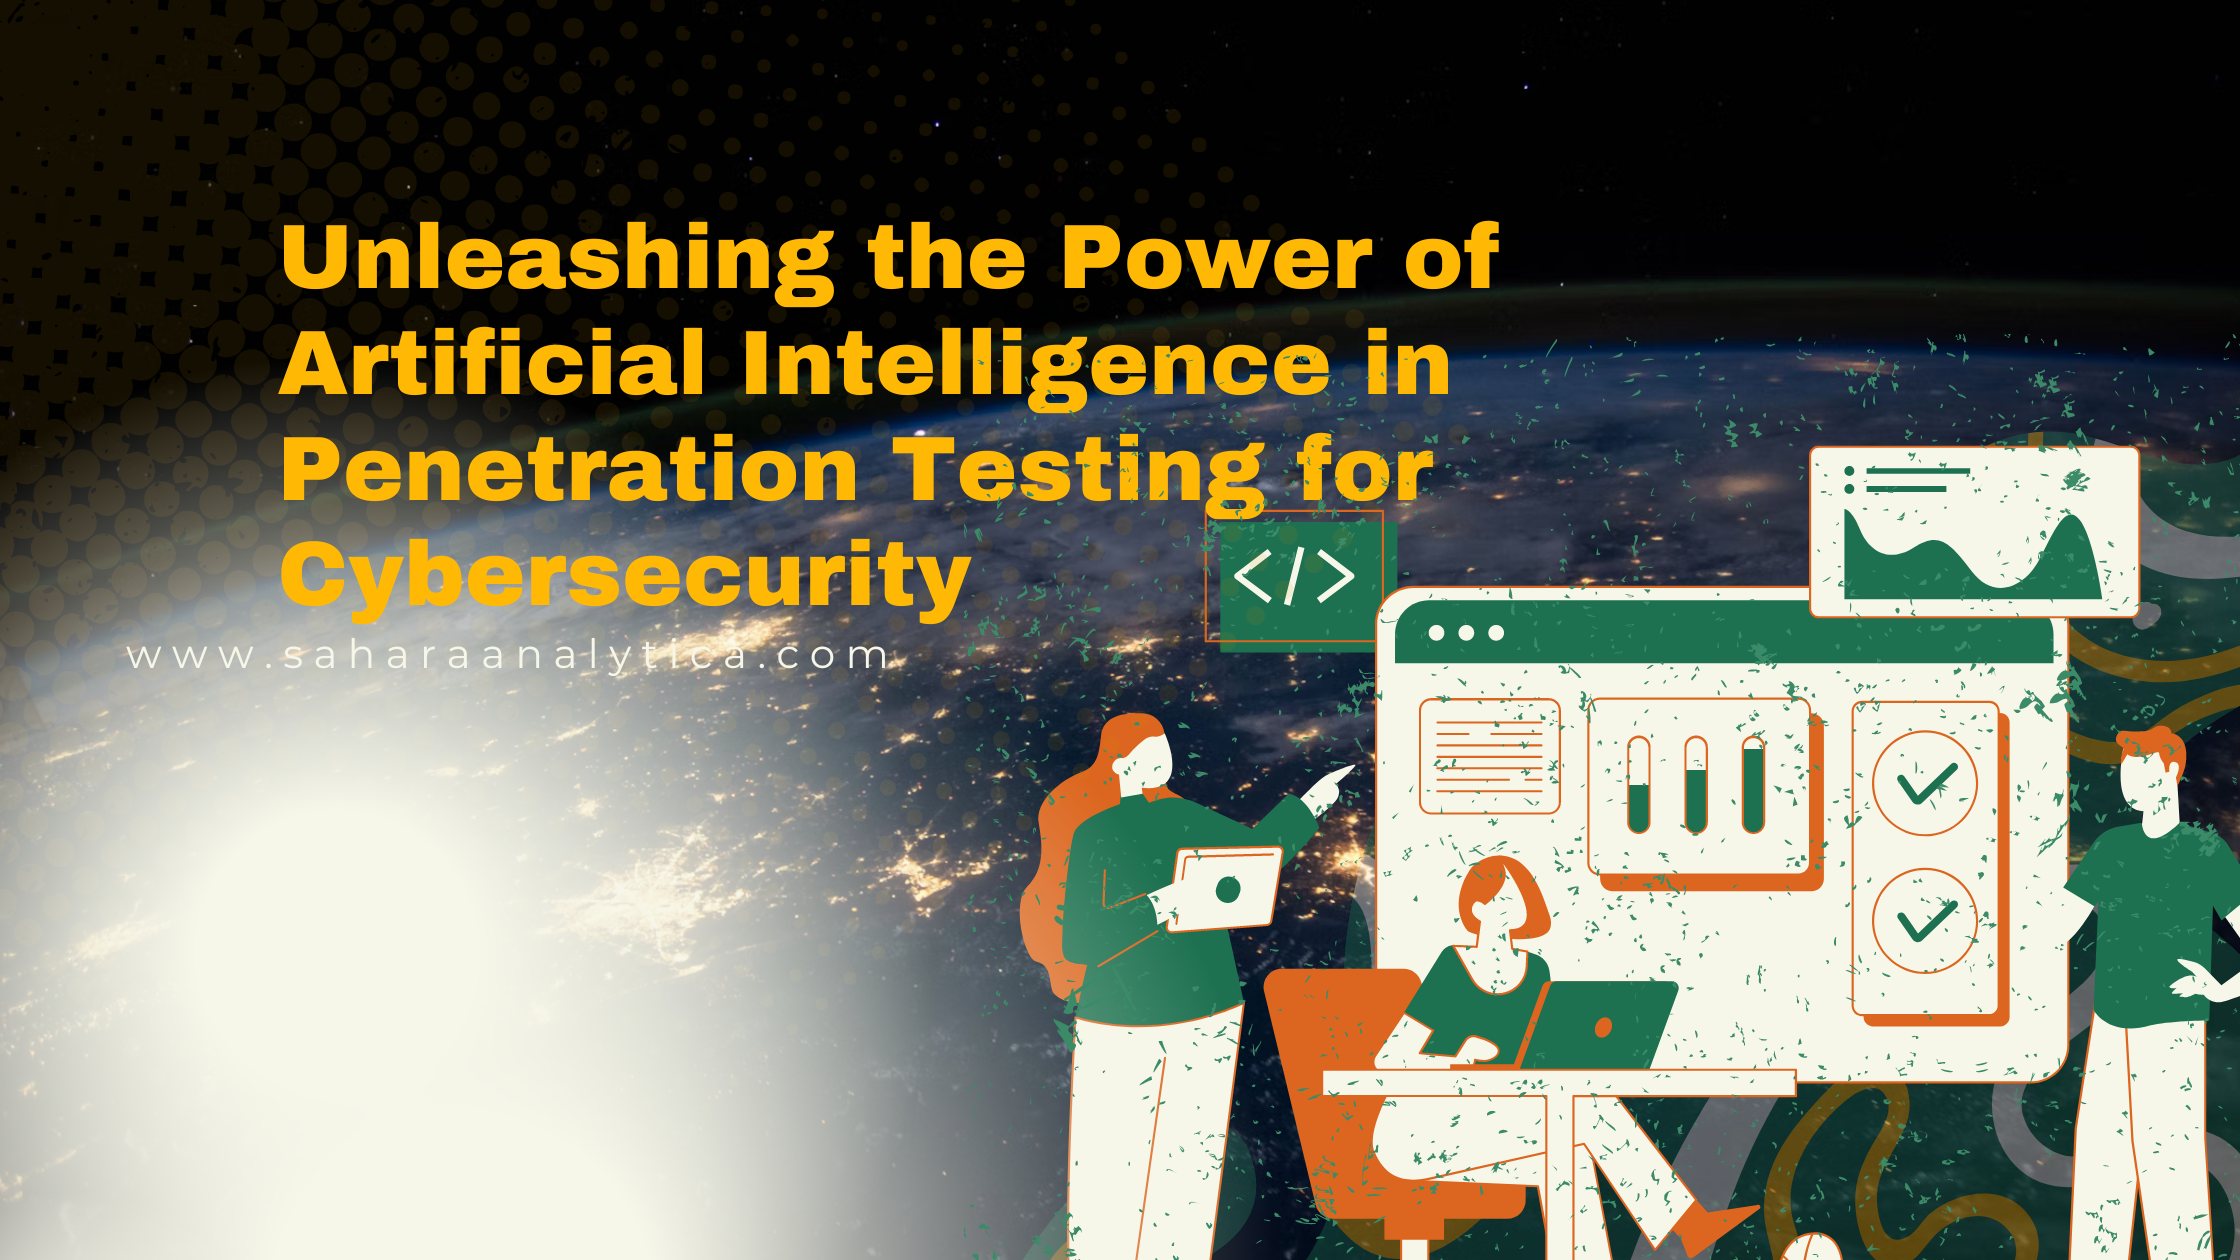 Unleashing the Power of Artificial Intelligence in Penetration Testing for Cybersecurity